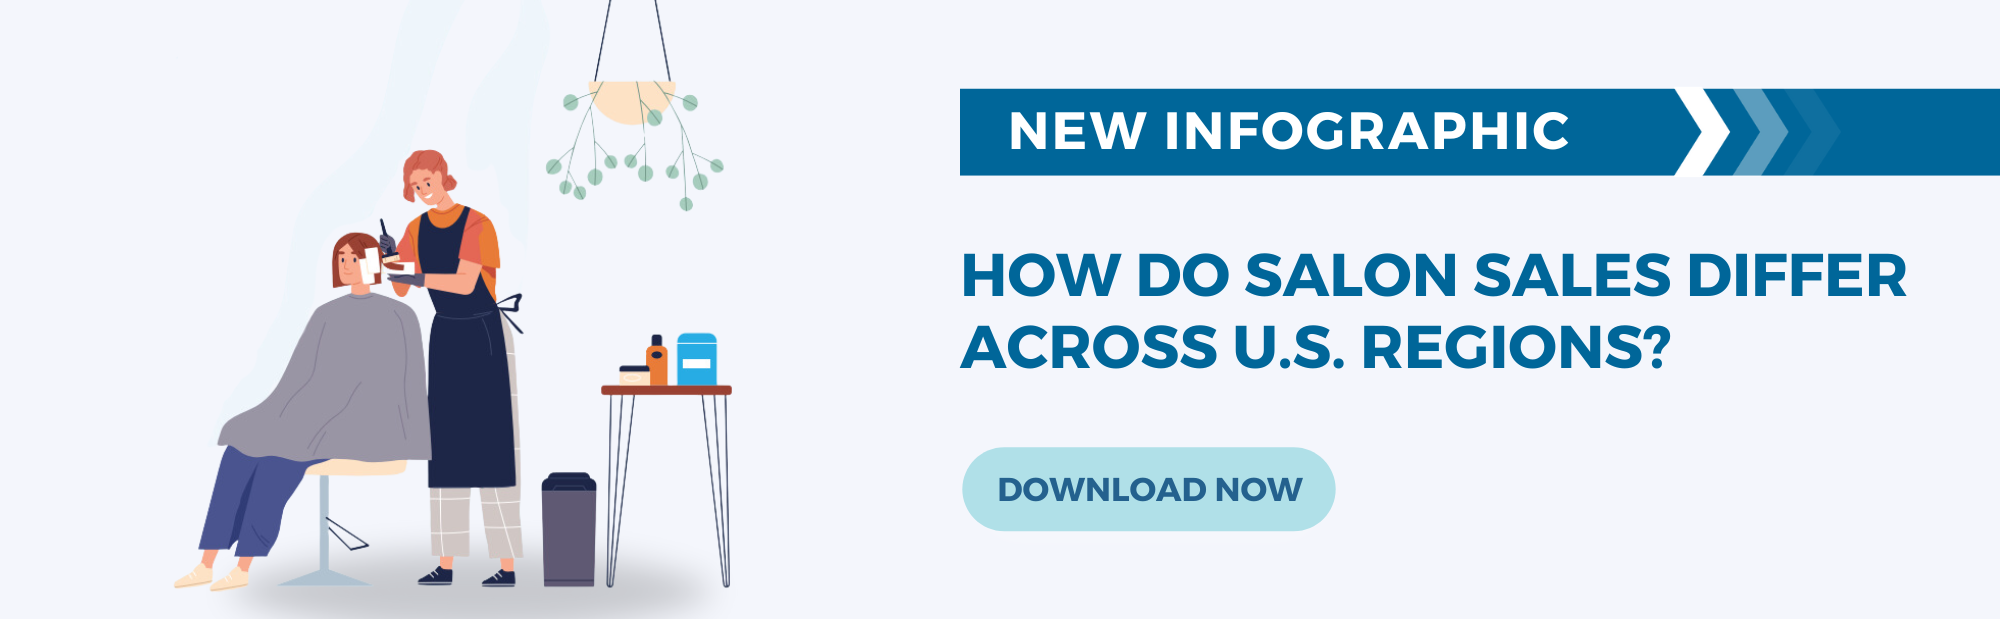 How do Salon Sales Differ Across U.S. Regions infographic banner homepage